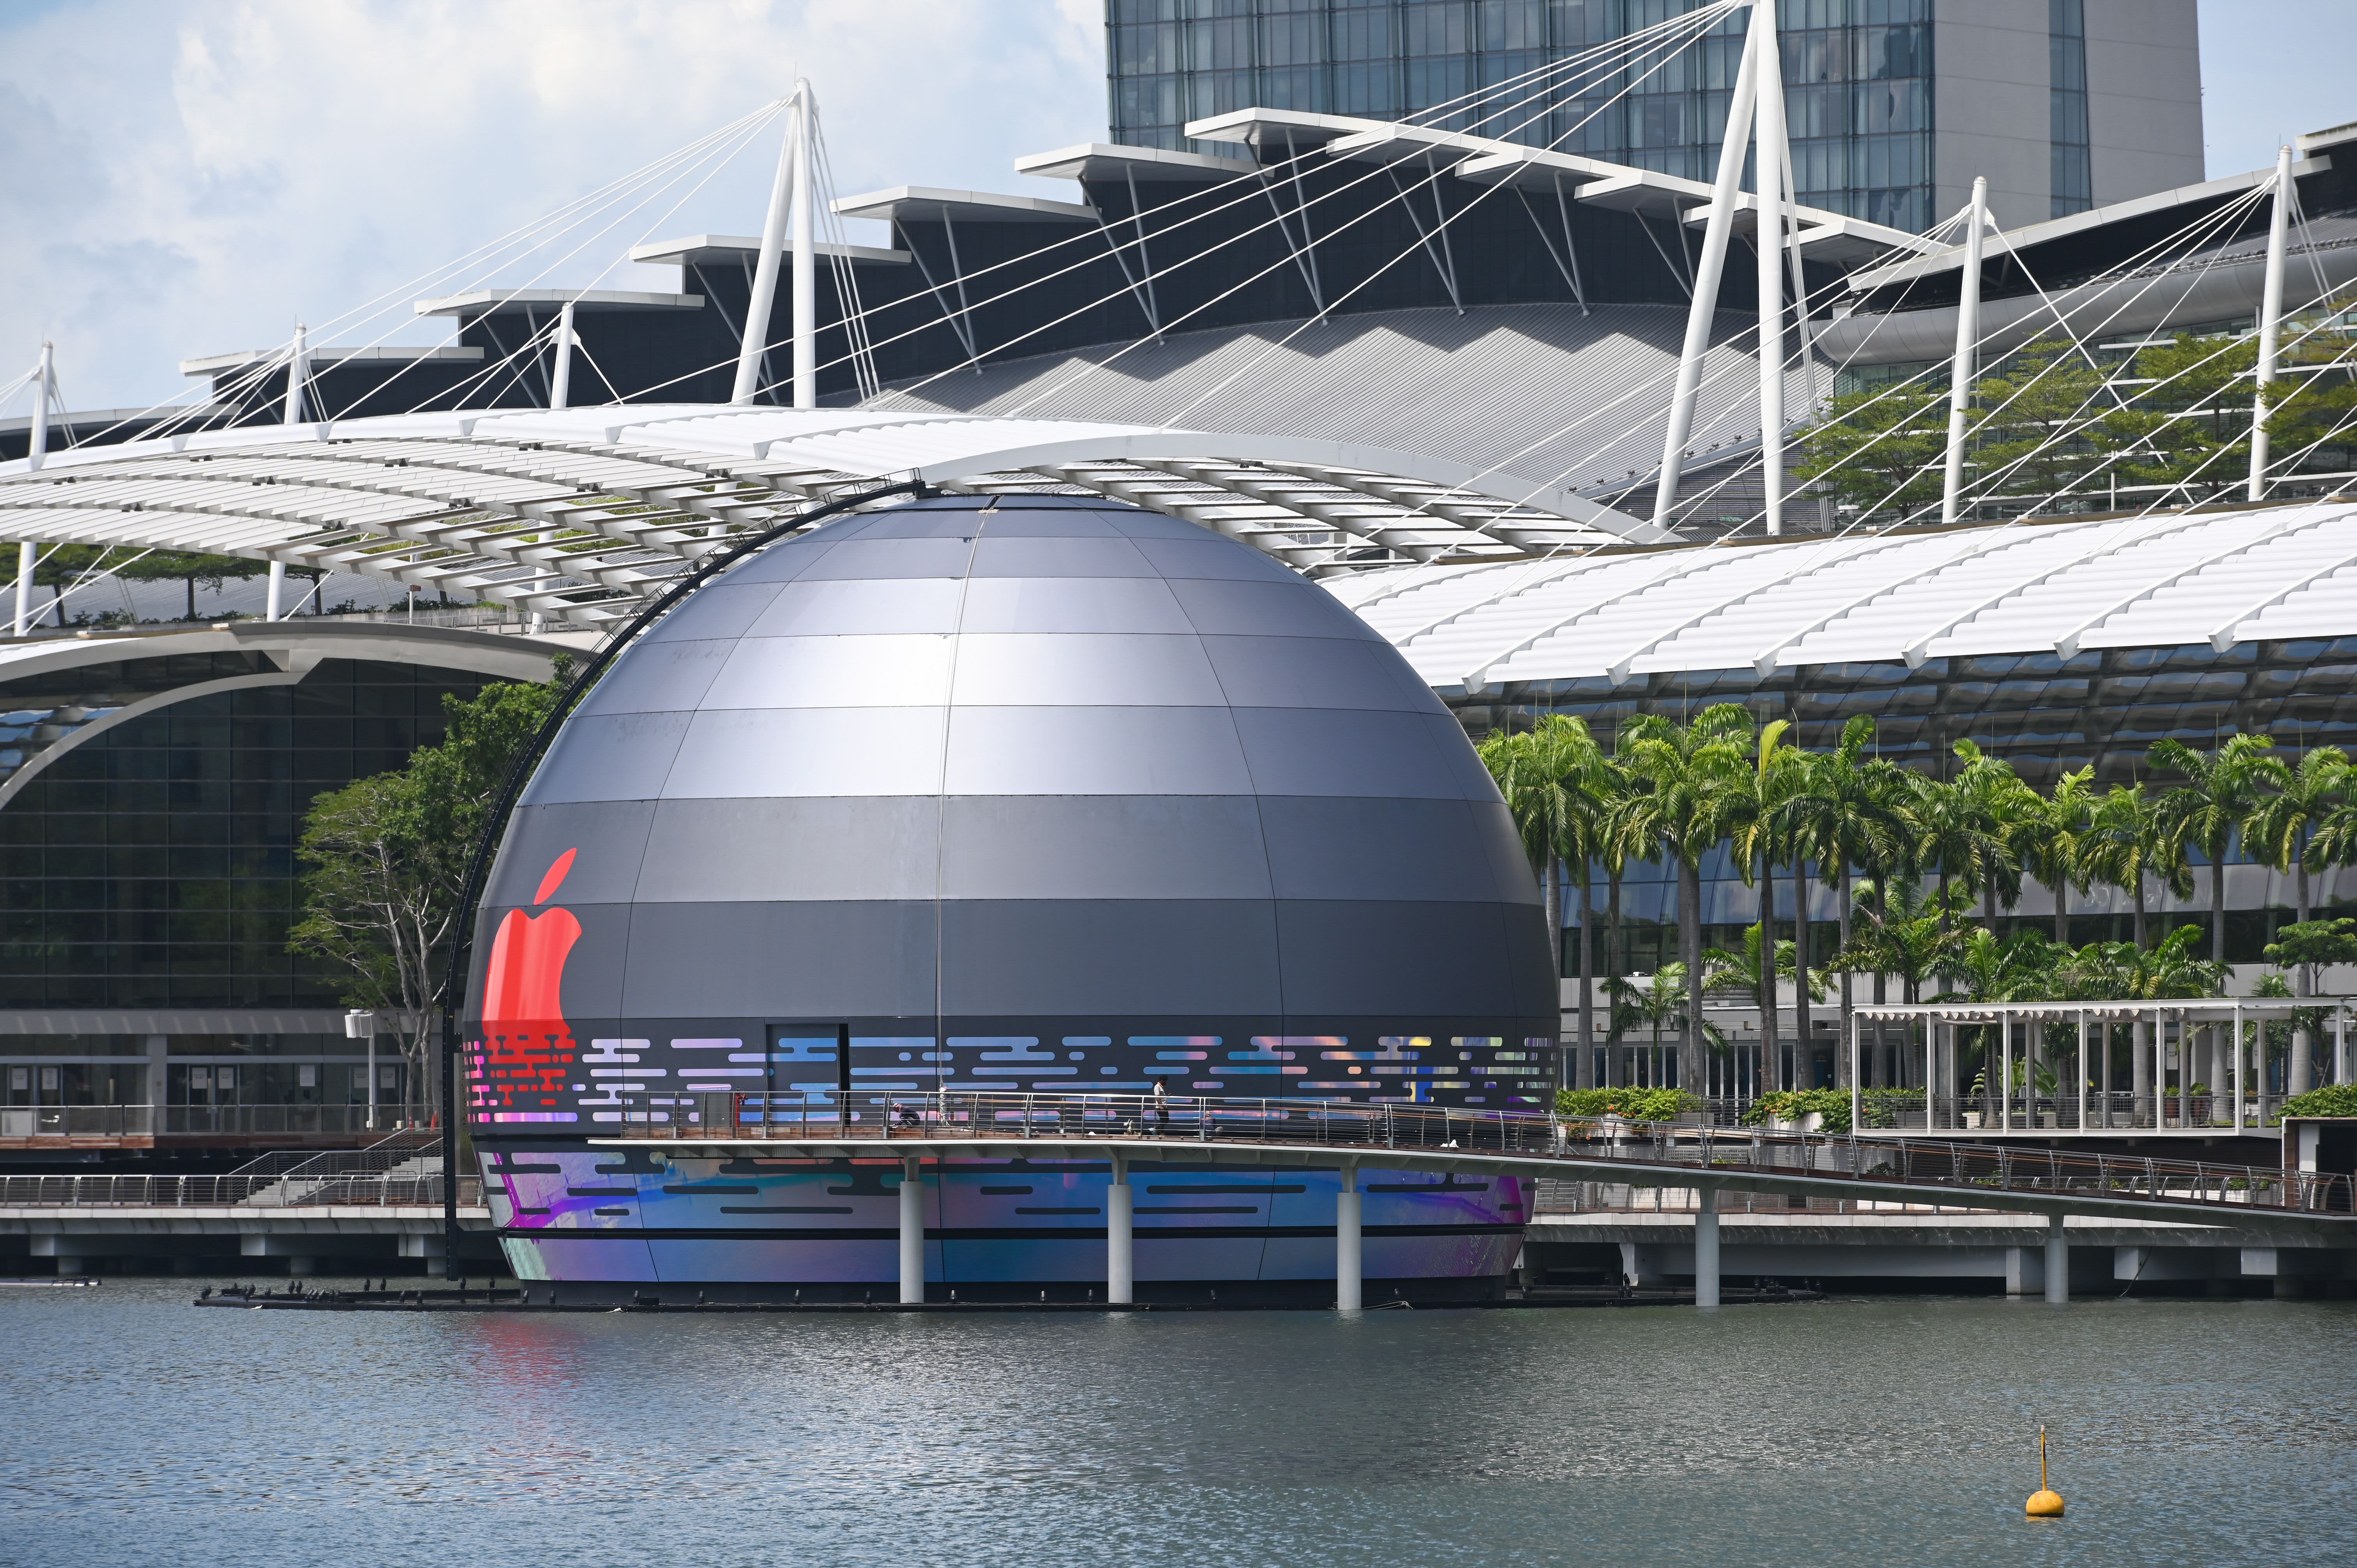 APPLE MARINA BAY SANDS: All You Need to Know BEFORE You Go (with Photos)